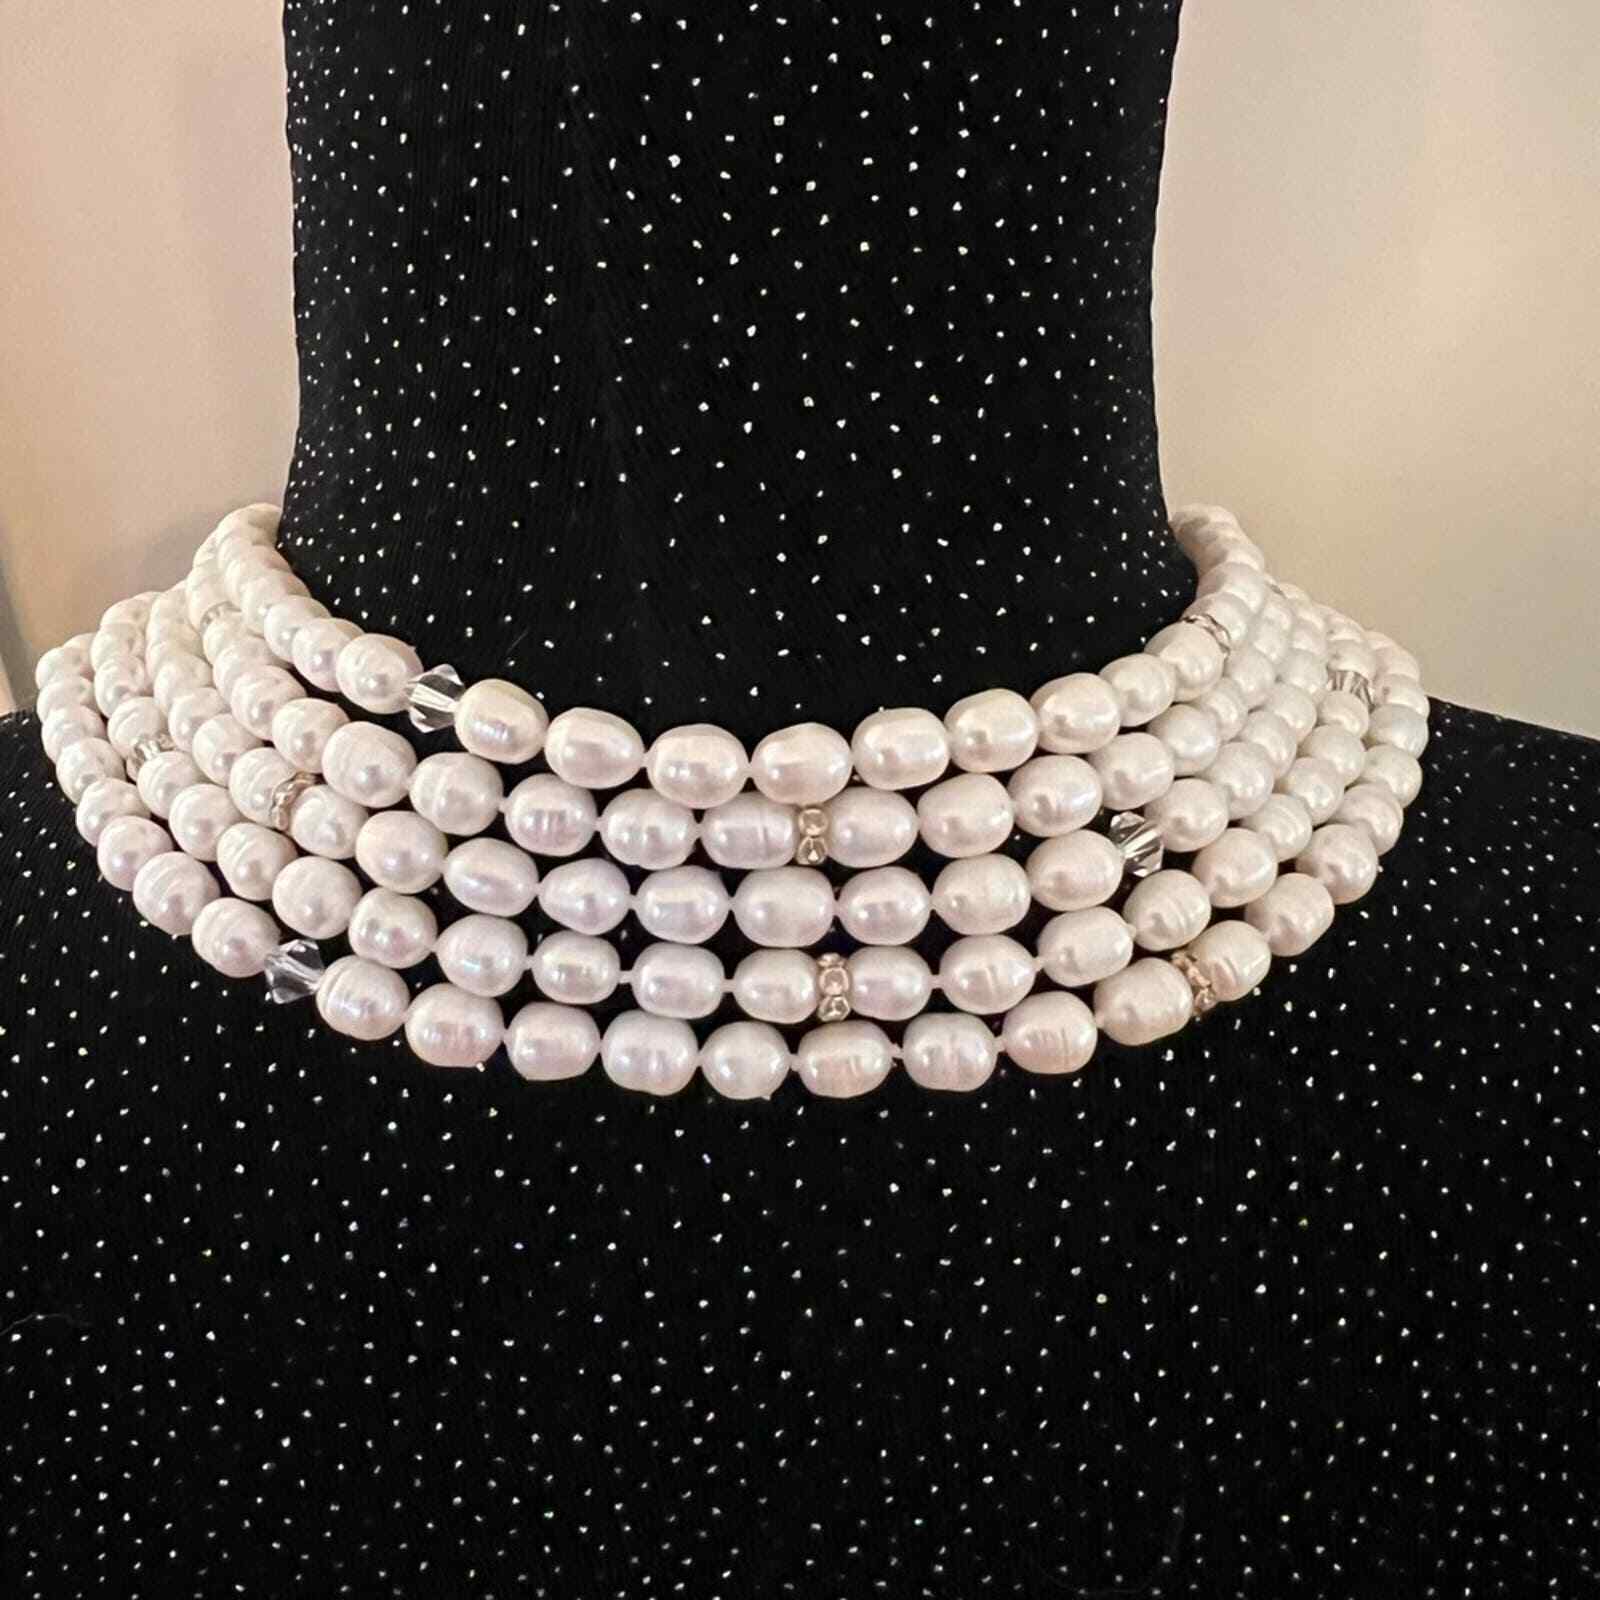 Freshwater Cultured Pearls w/Crystals 1 Strand Handmade Knotted 100” 6mm NWOT